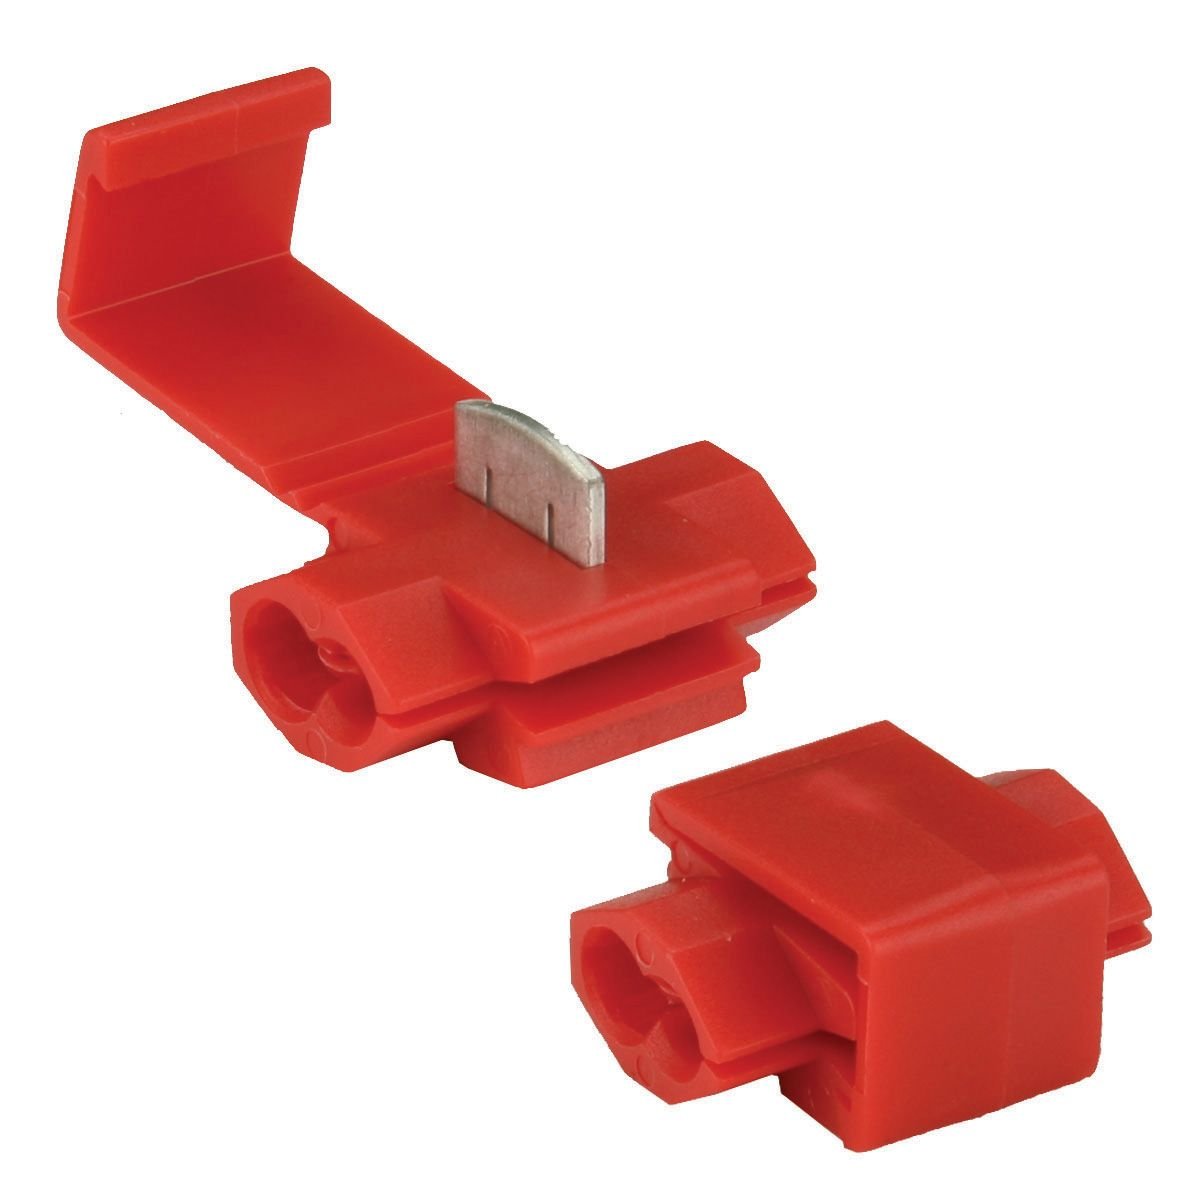 RED INSTANT TAP CONNECTOR 2218 GAUGE  PACKAGE OF 100